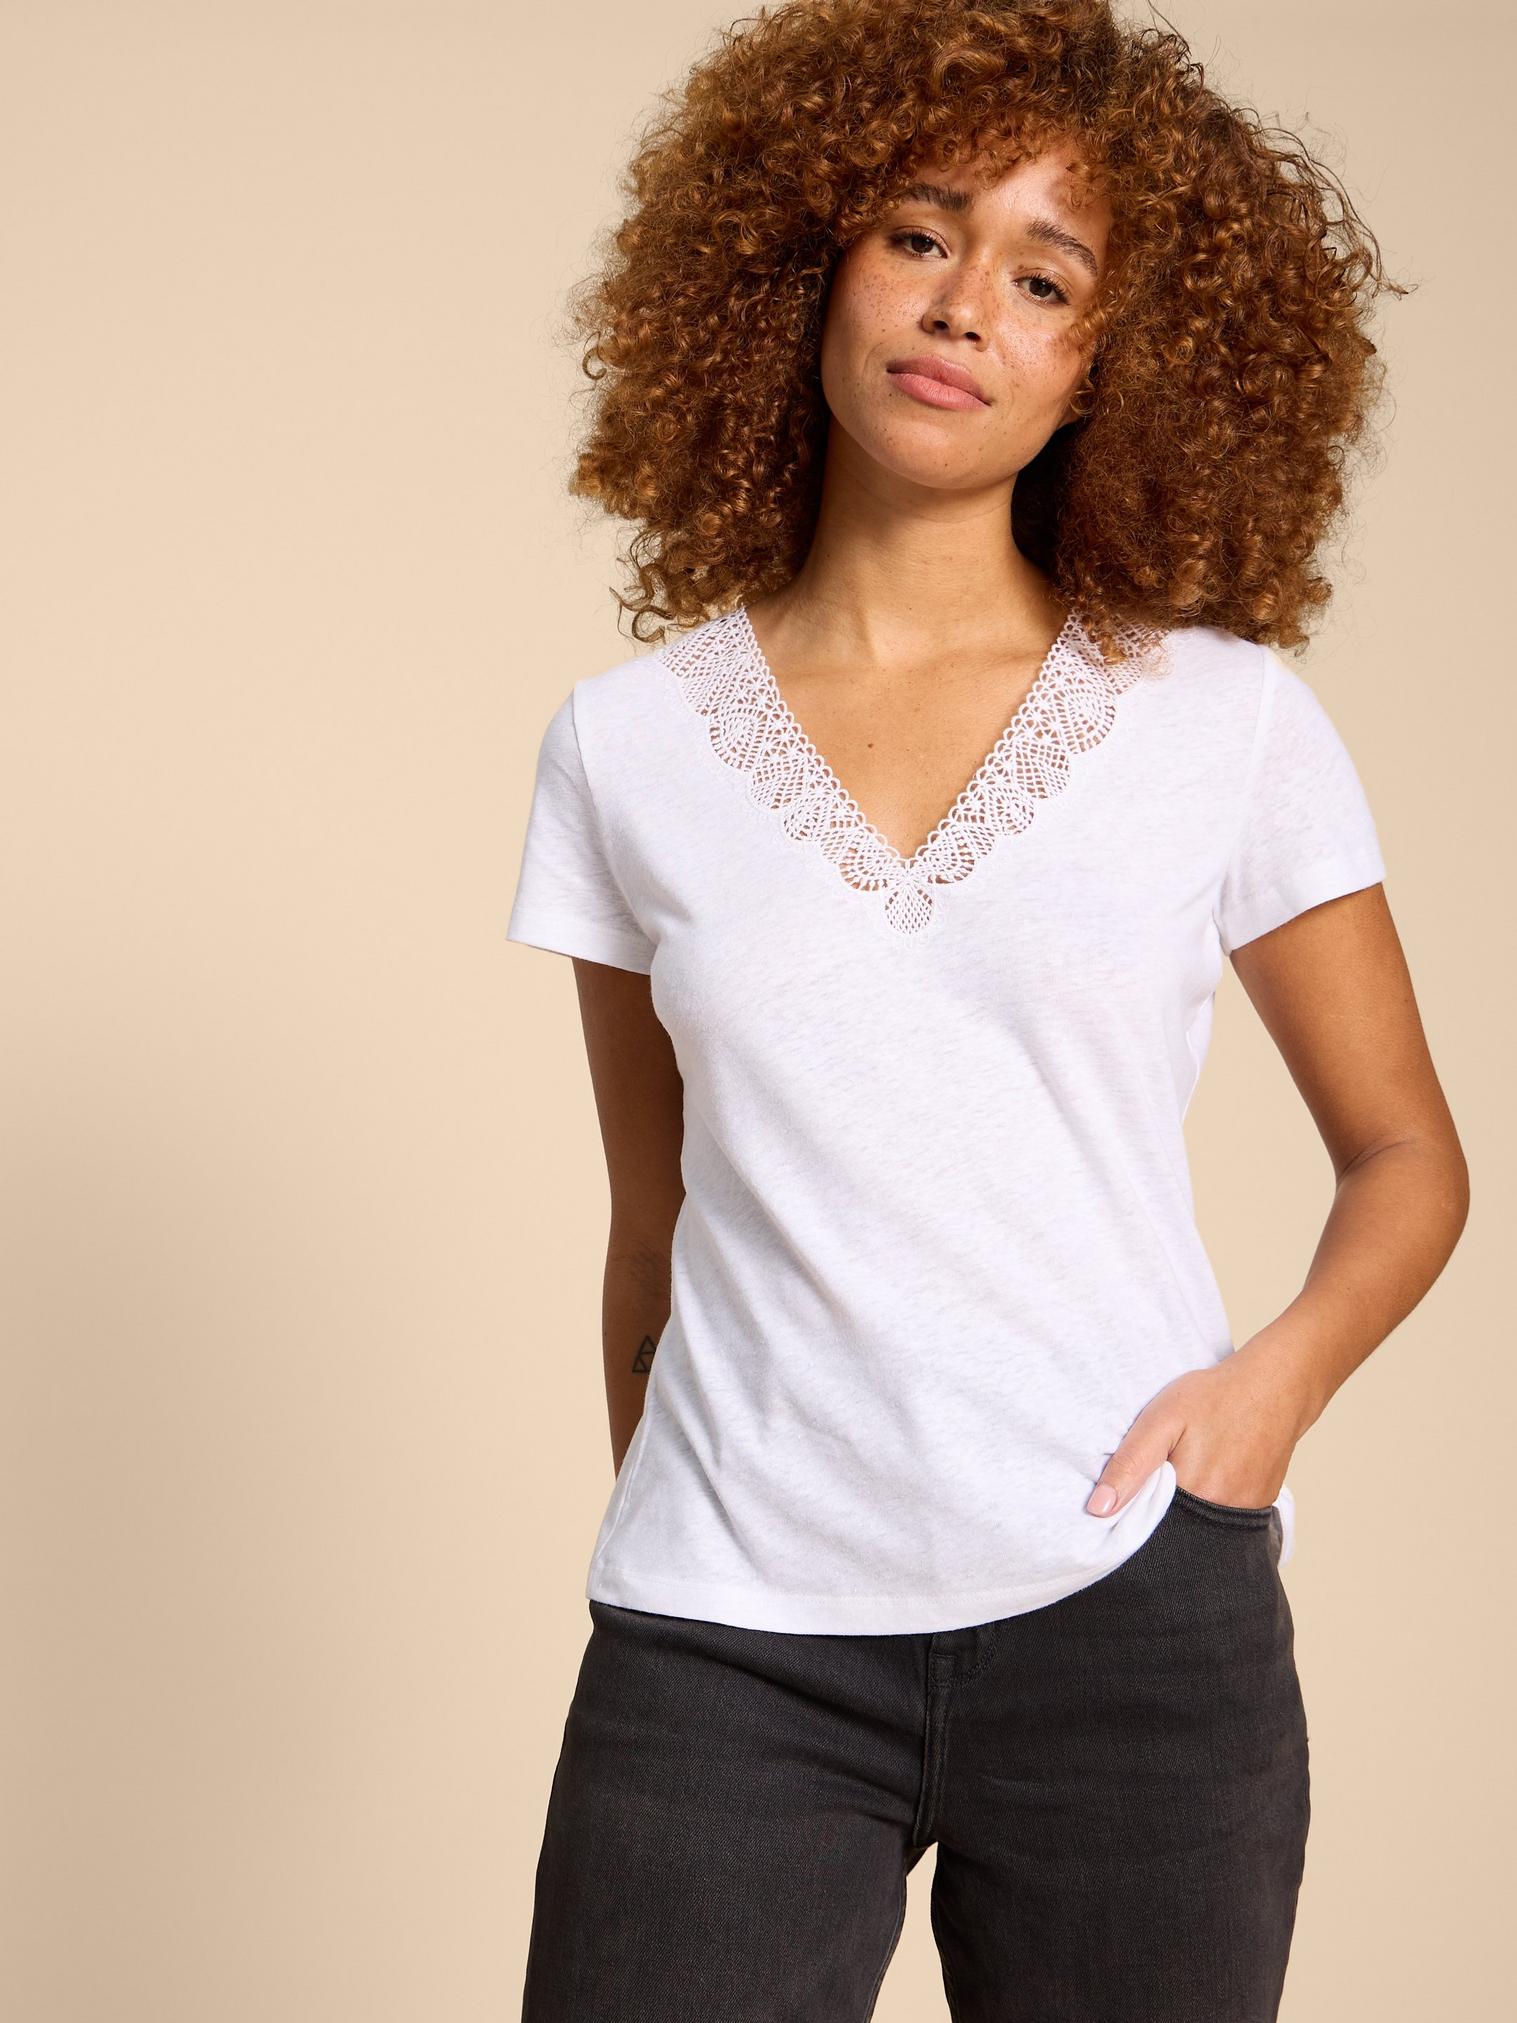 Ellie Linen Blend Lace Tee in BRIL WHITE - LIFESTYLE